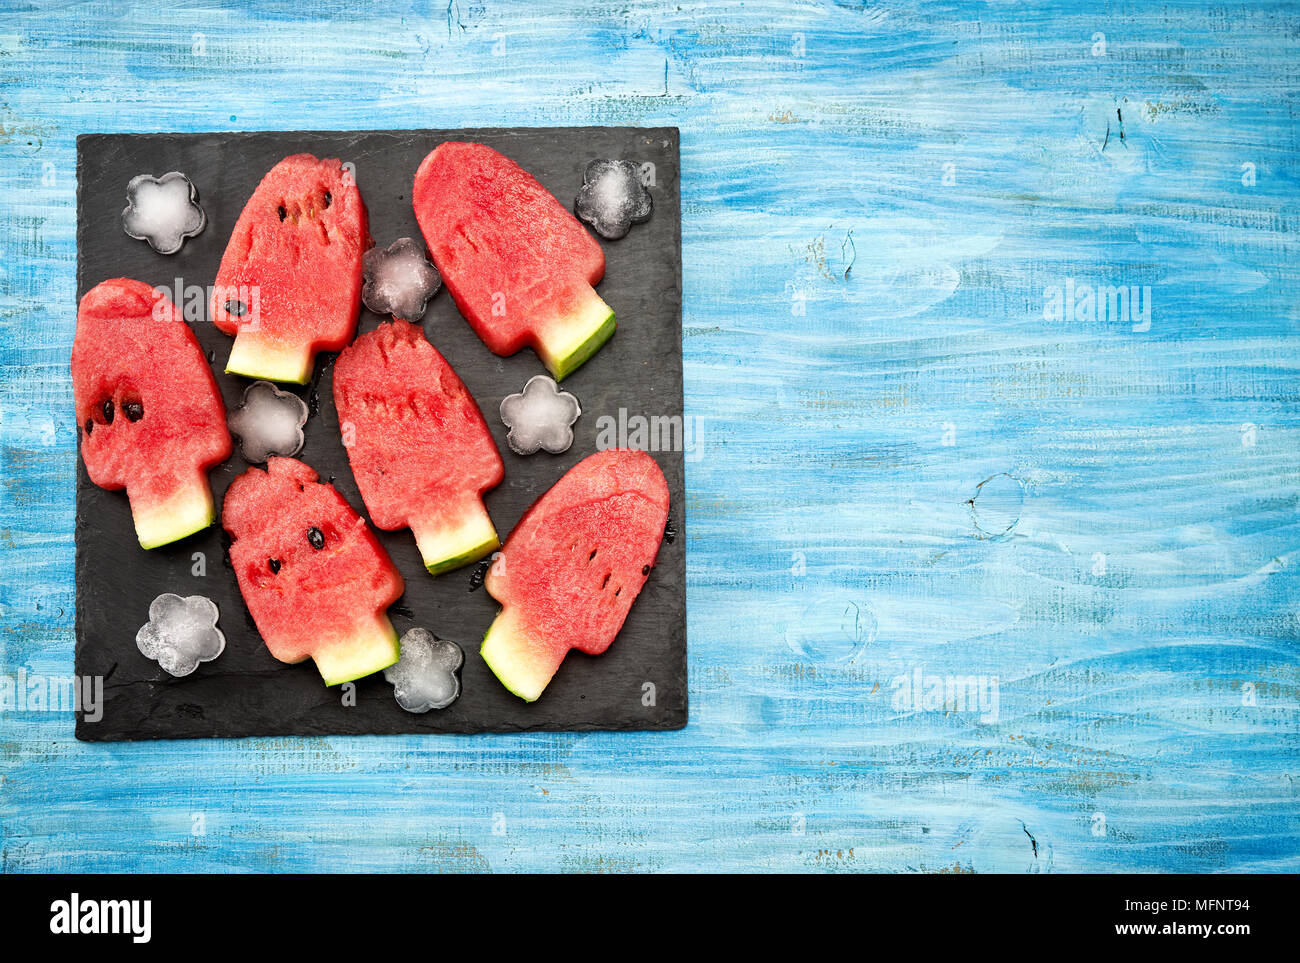 Watermelon peaces cut in ice cream lolly pop shape on bright blue background Stock Photo